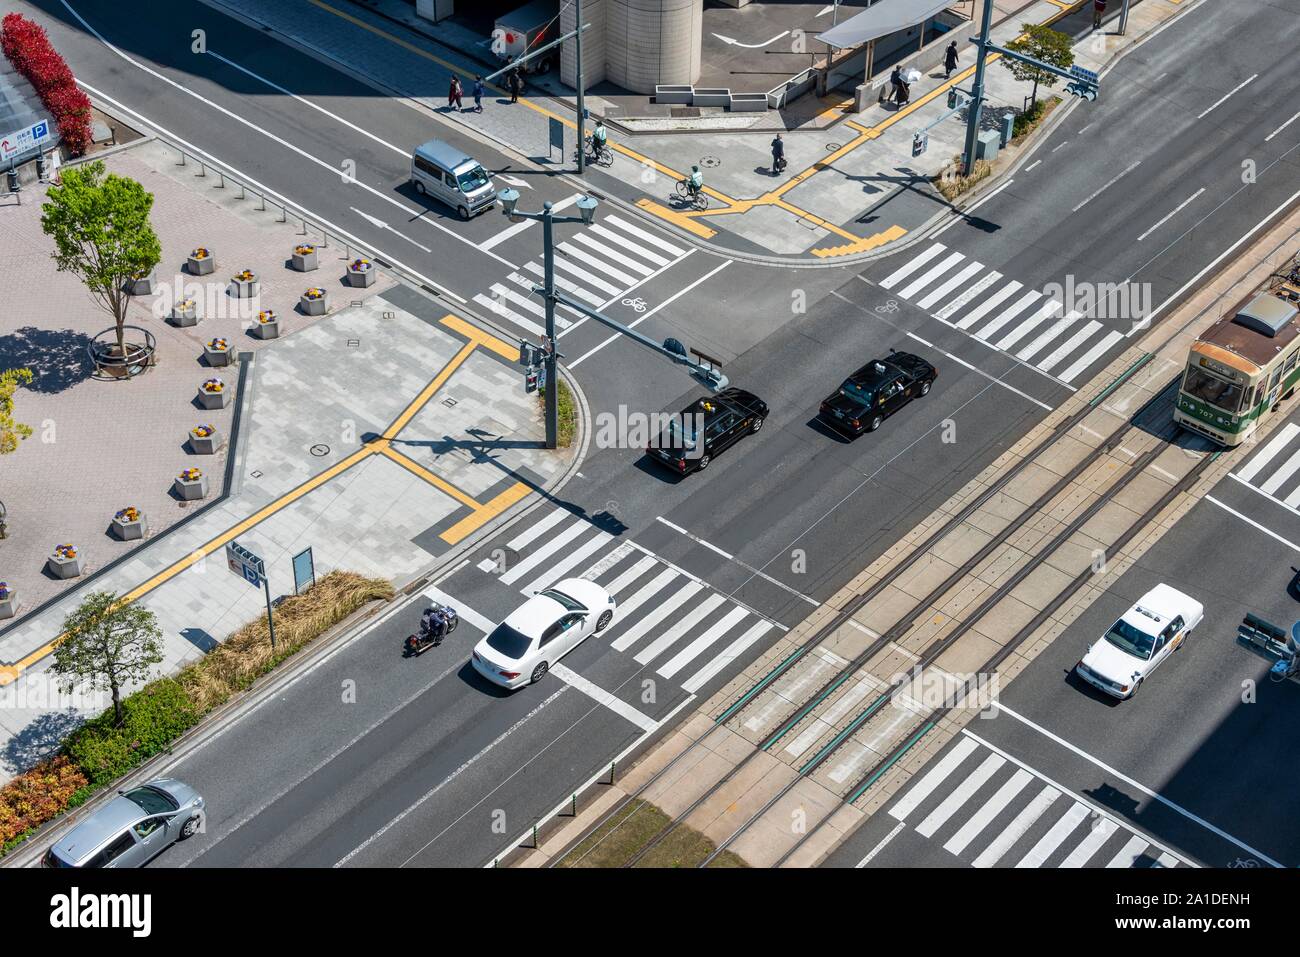 View of intersection from above, bird's eye view, Hiroshima, Japan Stock Photo